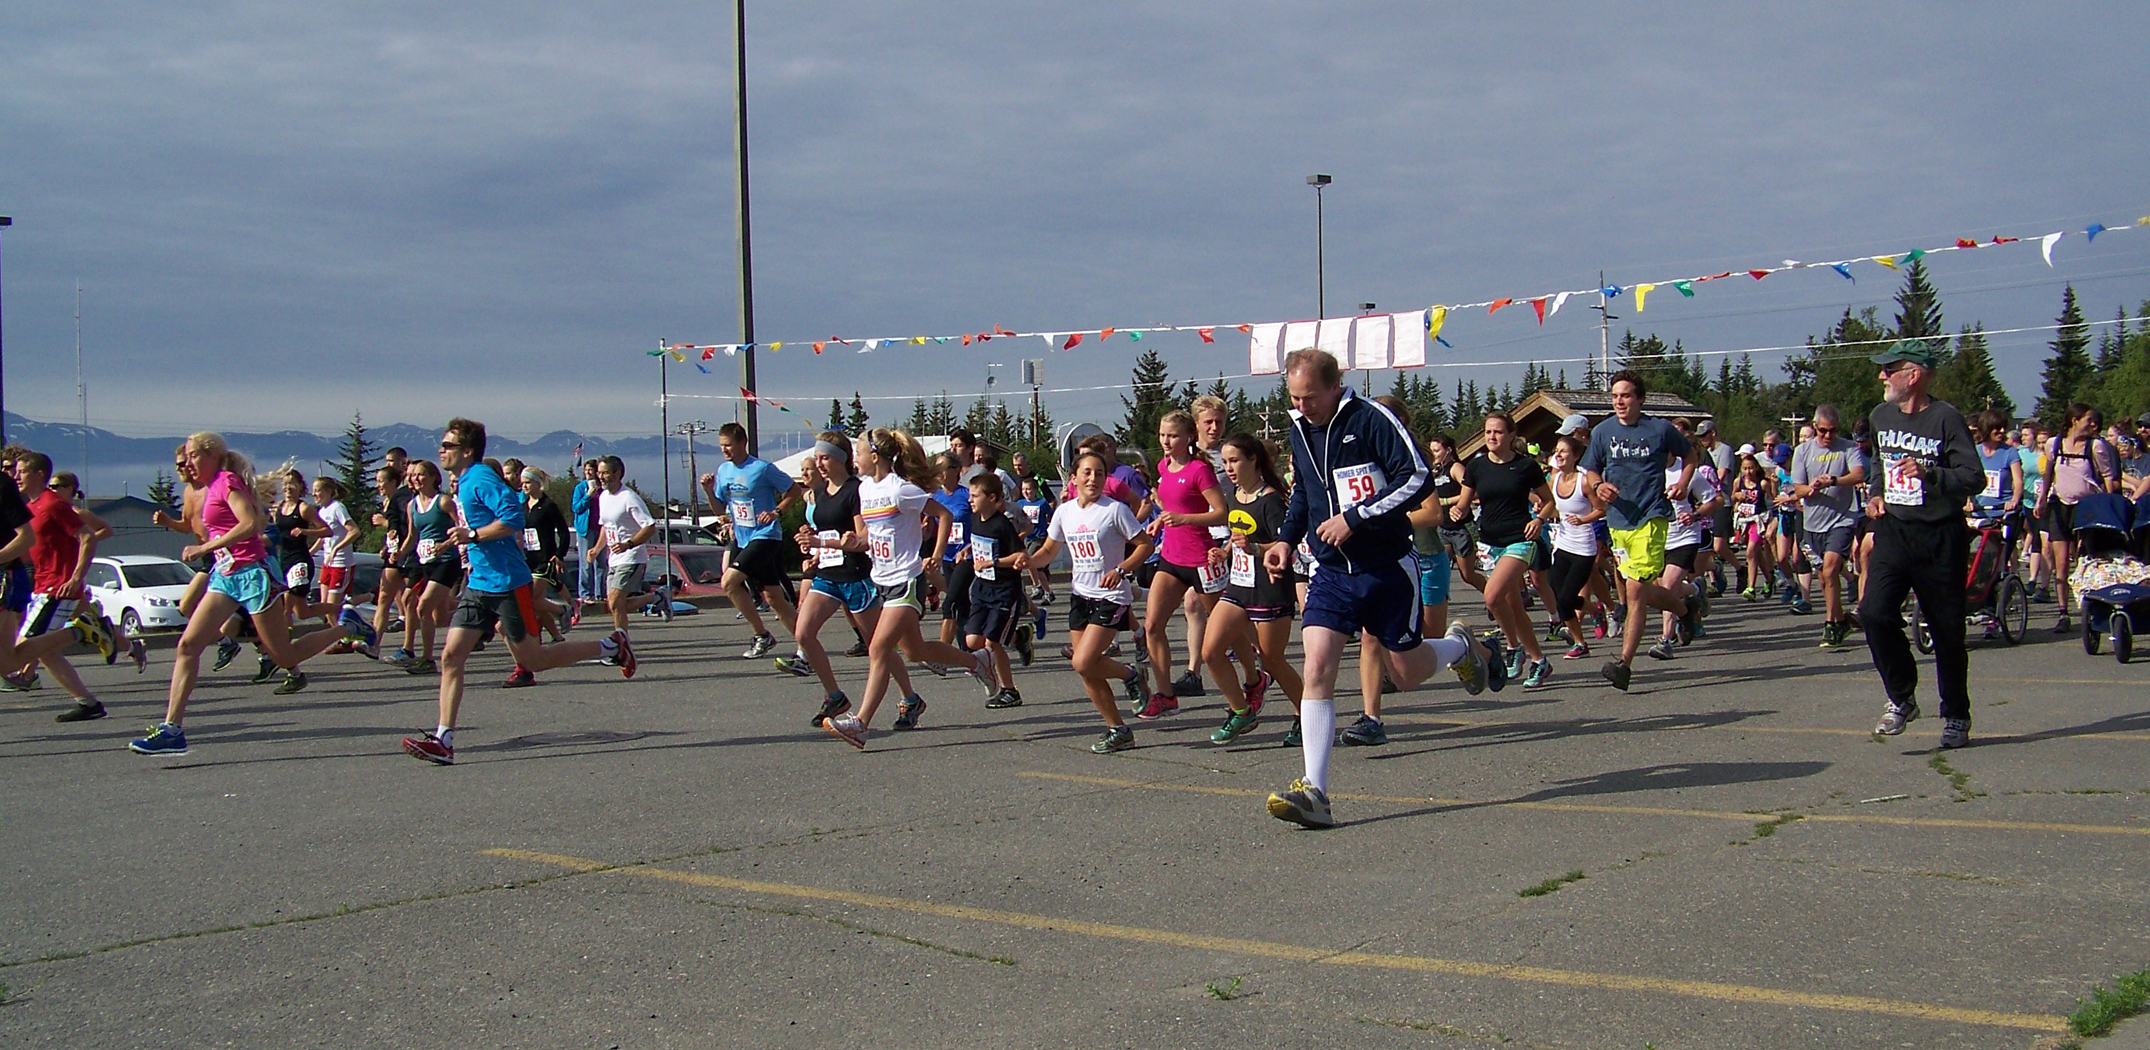 More than 300 participants are off and running at the start of the 10K to the Bay Spit Run.-Photos by McKibben Jackinsky, Homer News